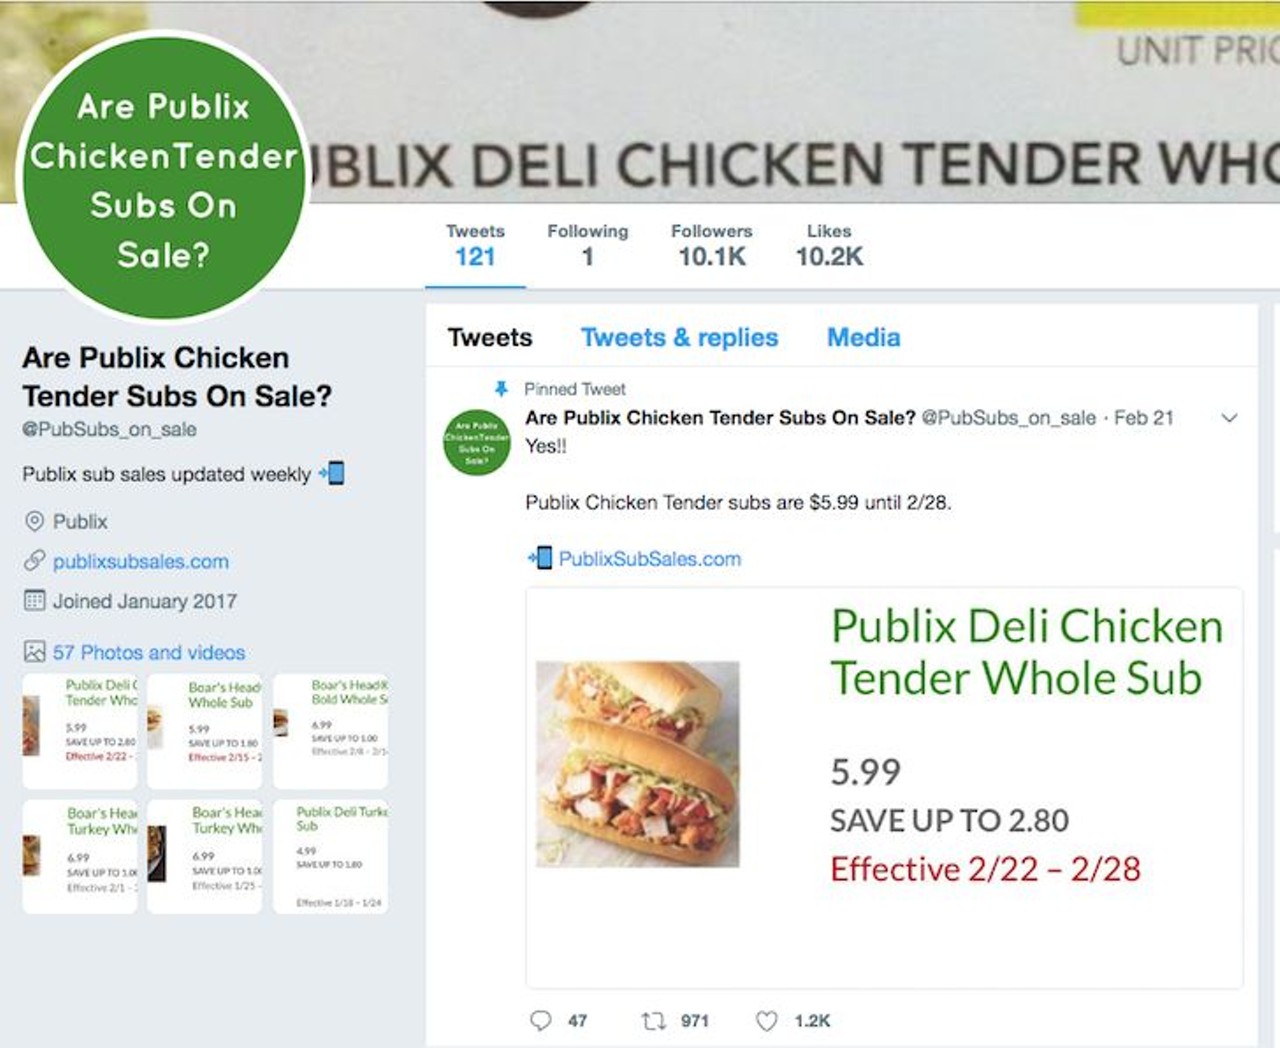  There is a way to always know if chicken tender Pub subs are on sale 
While there&#146;s no official way to see if chicken tender Pub subs are on sale, there is a Twitter account, @twitter.com/PubSubs_on_sale, that has taken on this weighty responsibility. Not all heroes wear capes. 
Photo via PubSubs_on_sale via Twitter